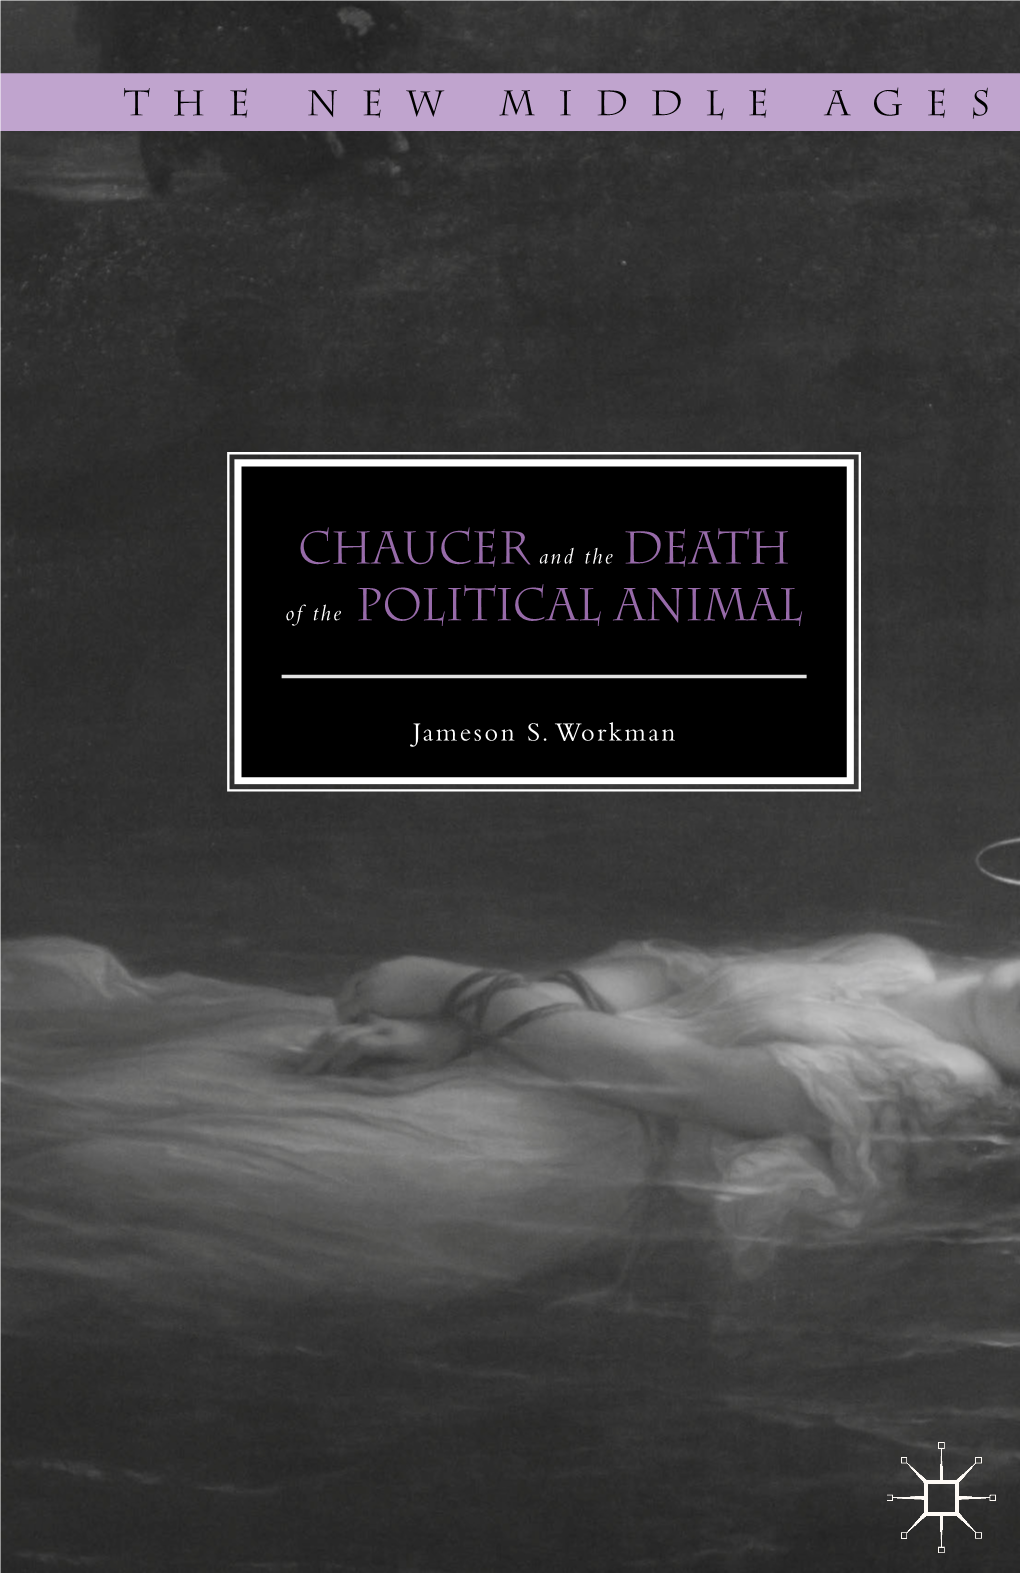 Chaucer and the Death of the Political Animal by Jameson S